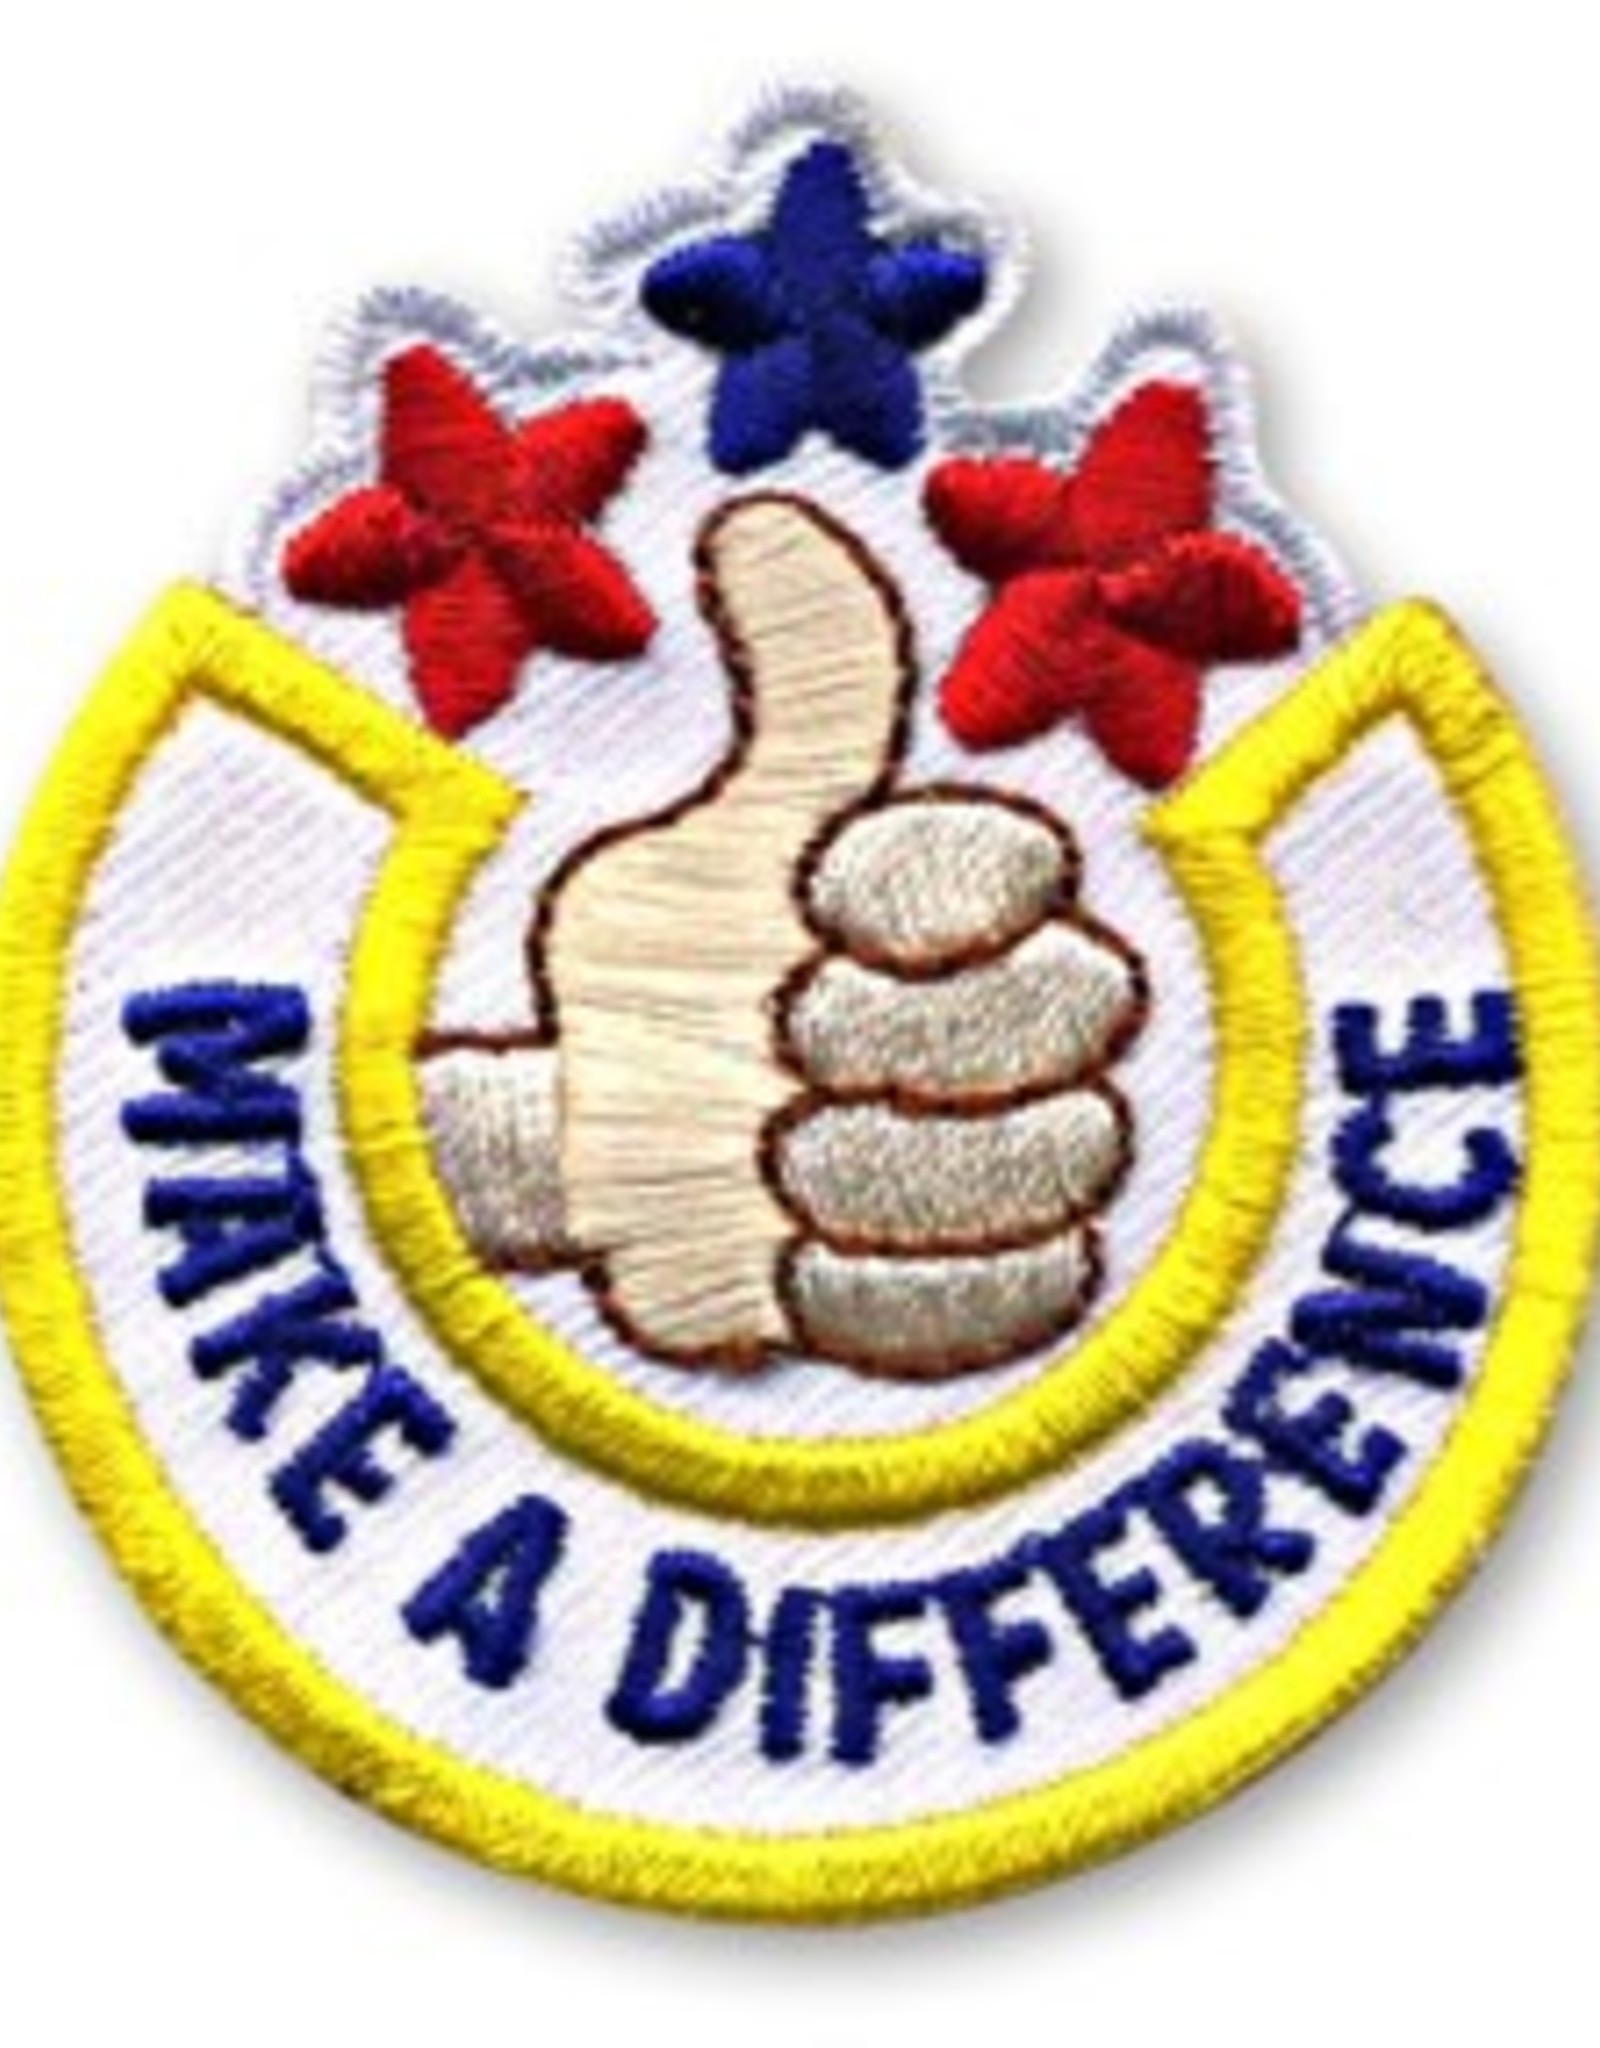 snappylogos Make a Difference Thumbs Up Fun Patch (3522)